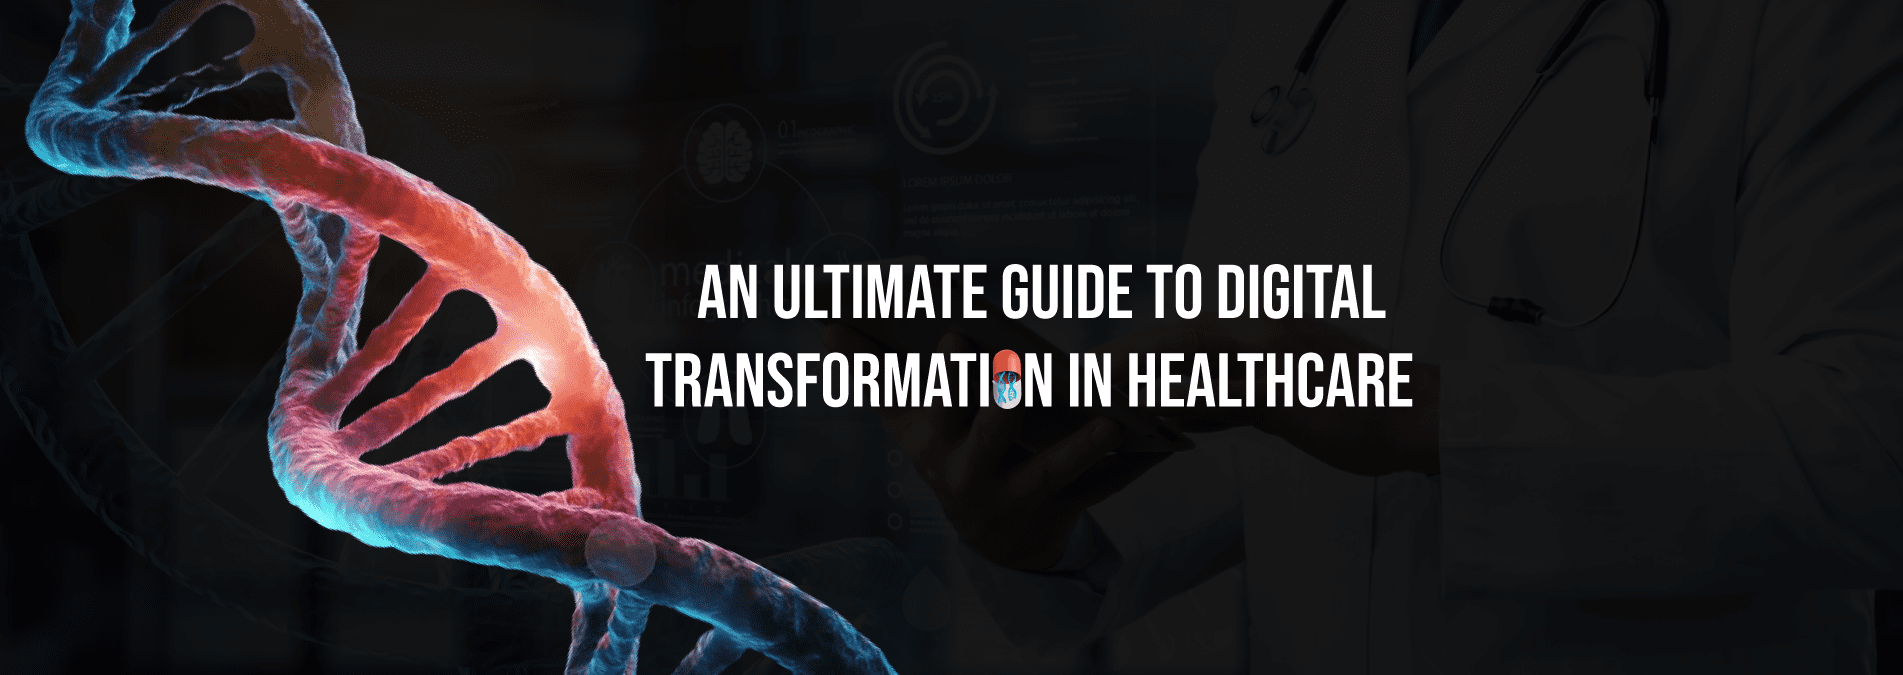 An Ultimate Guide to Digital Transformation in Healthcare - Internet Soft